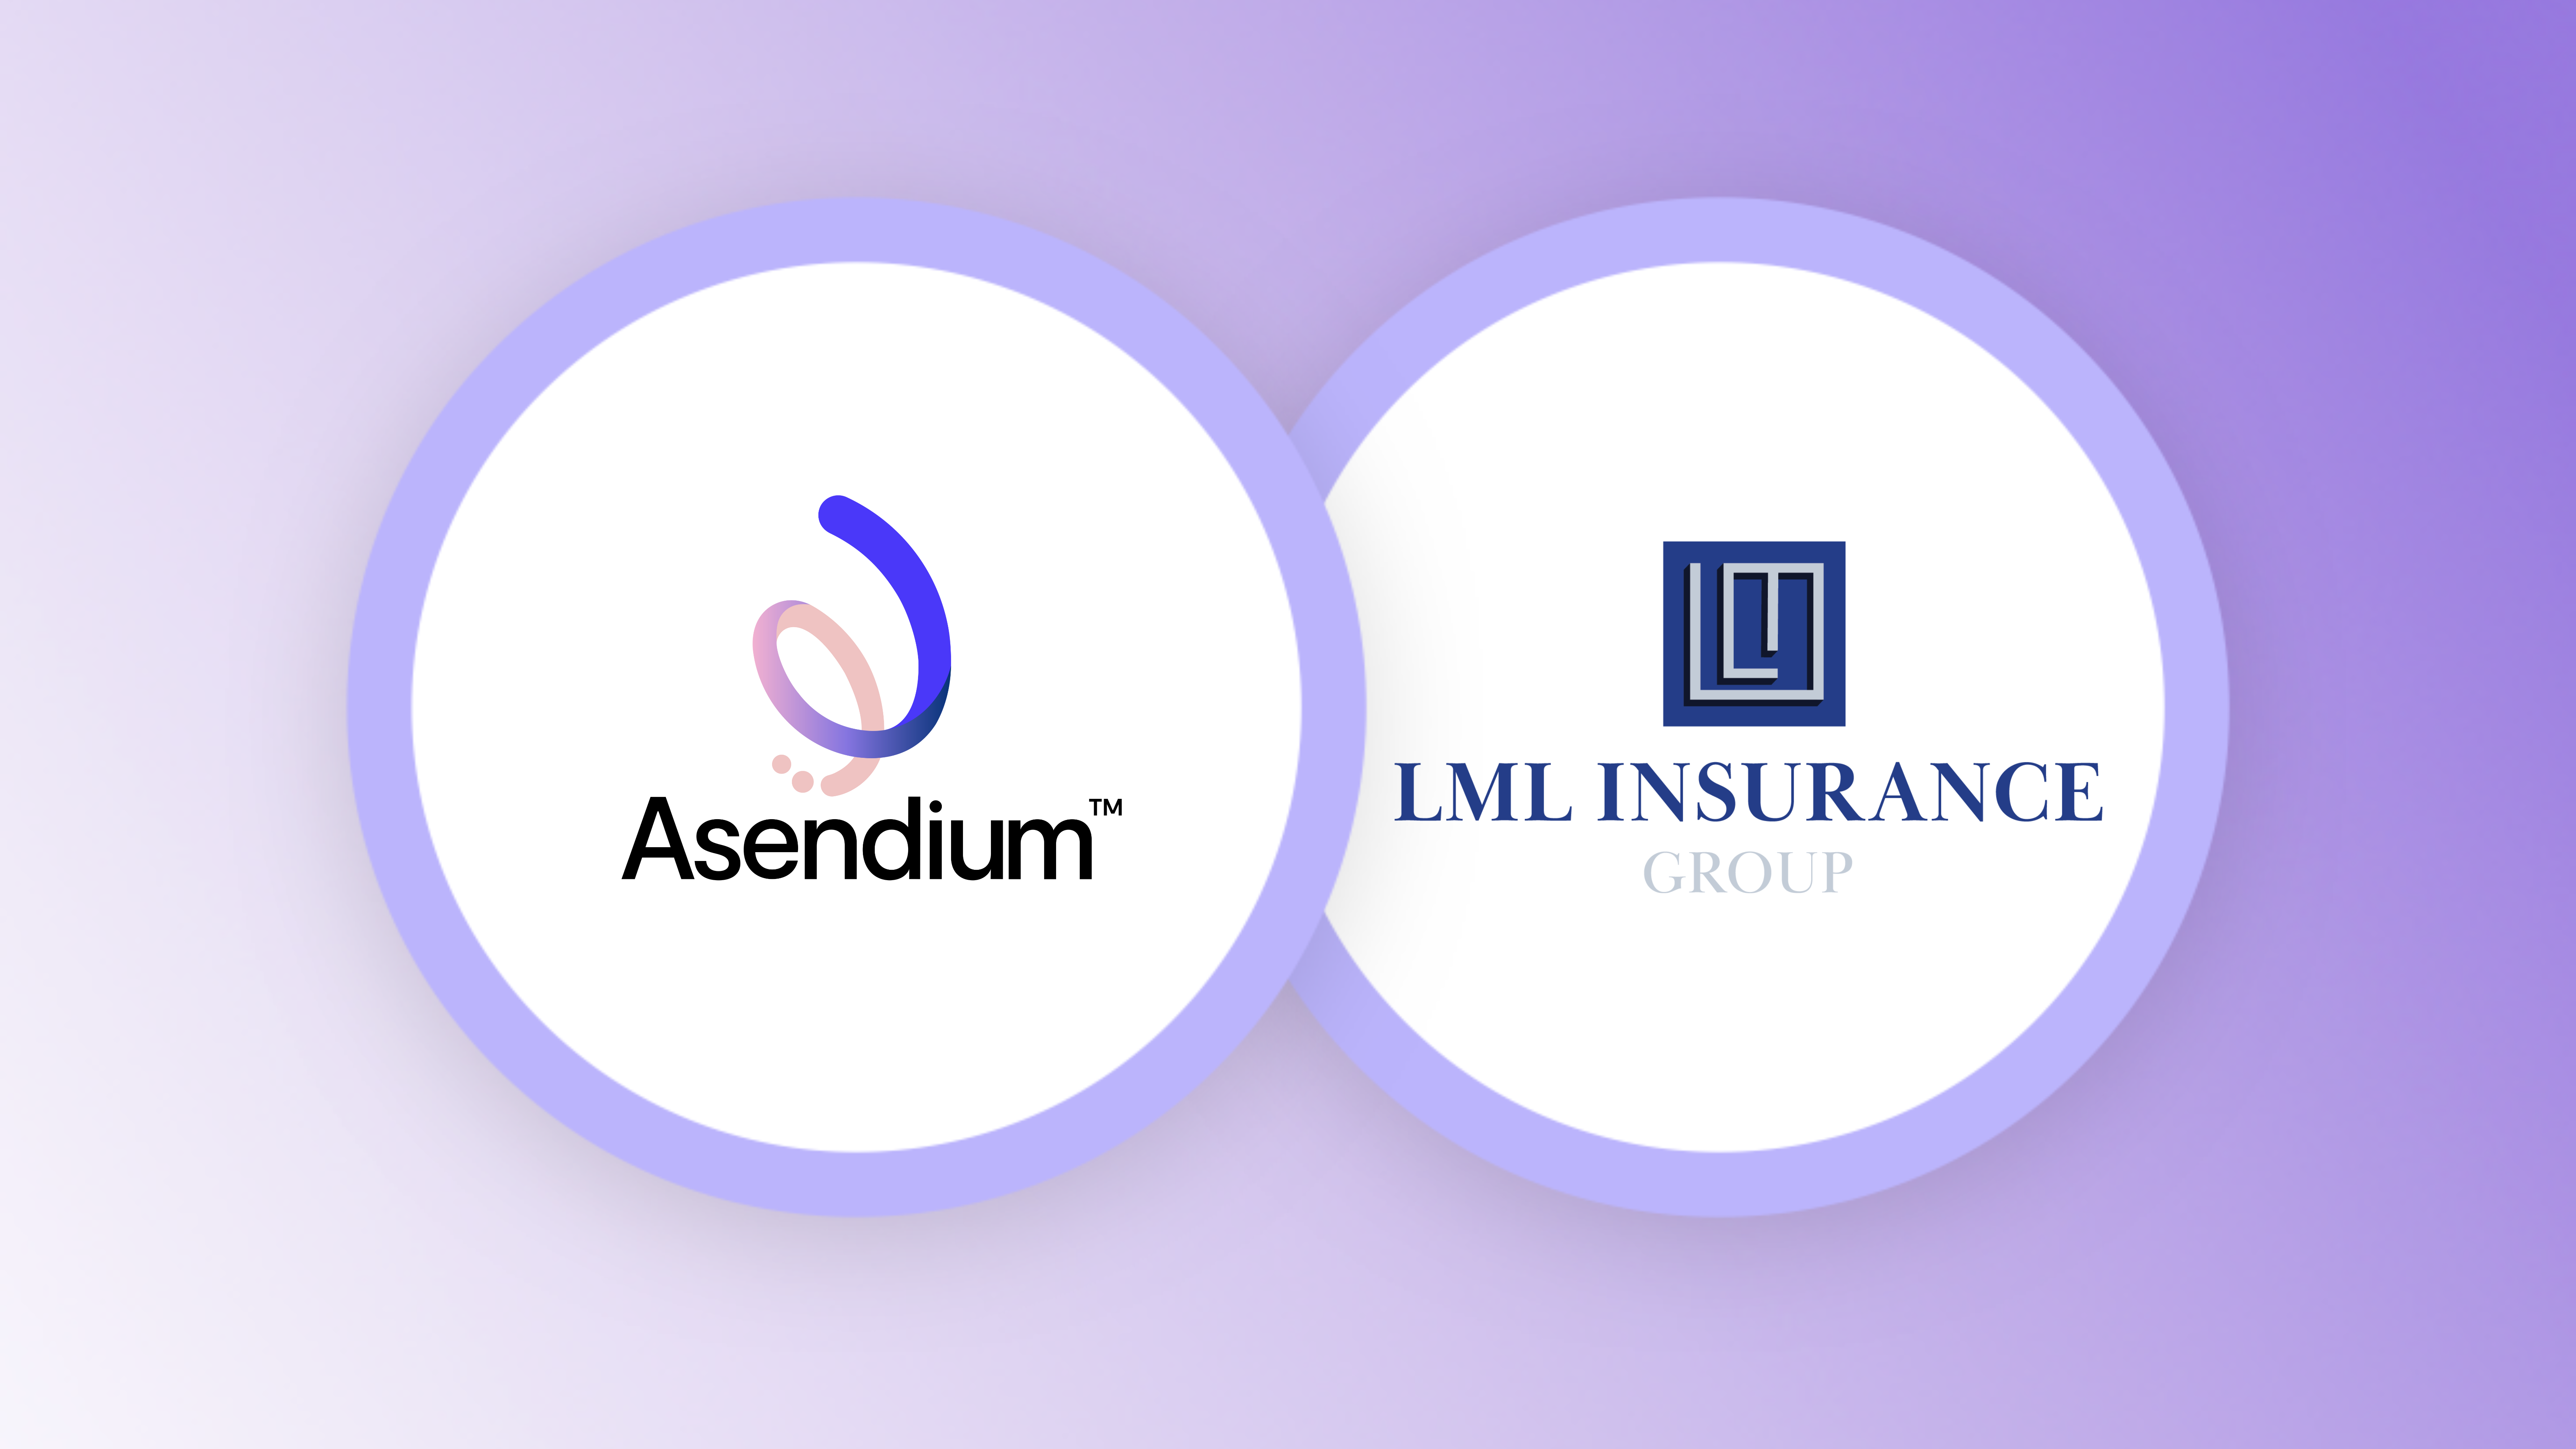 Graphic depicting both Asendium's and LML Insurance Group's logos side by side.